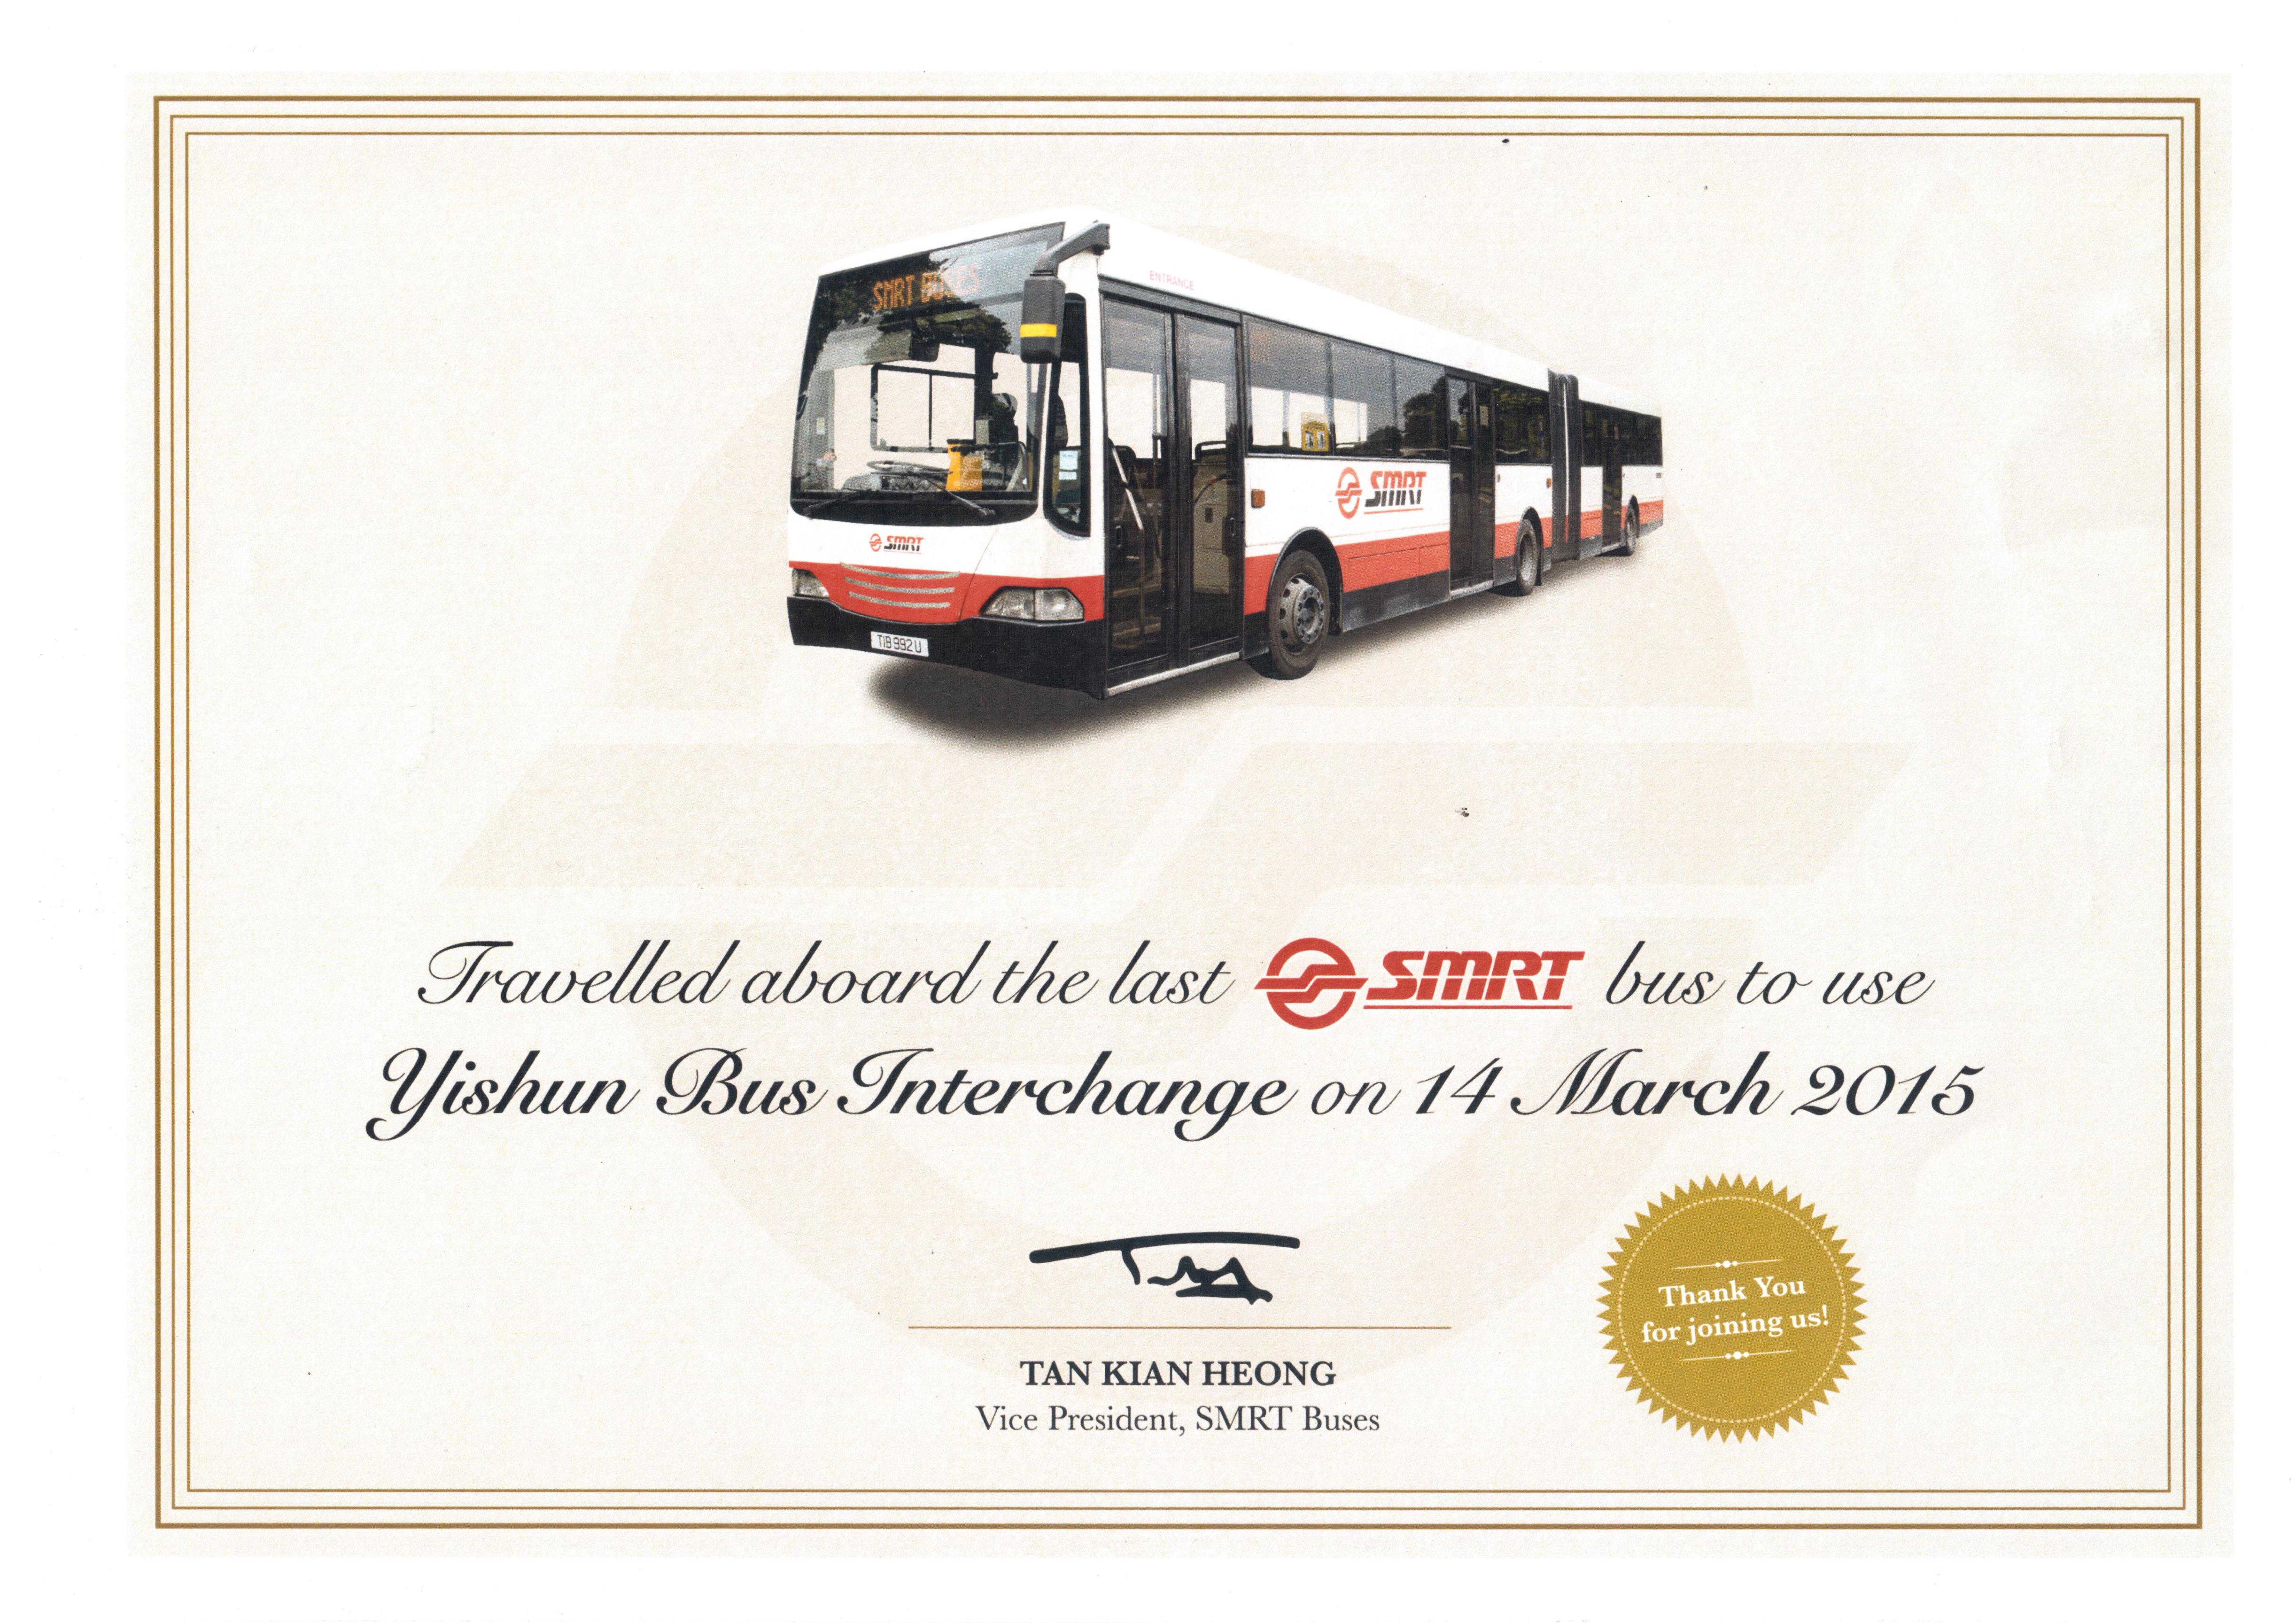 Now you can own your own Yishun last bus certificate! (Click for larger image)